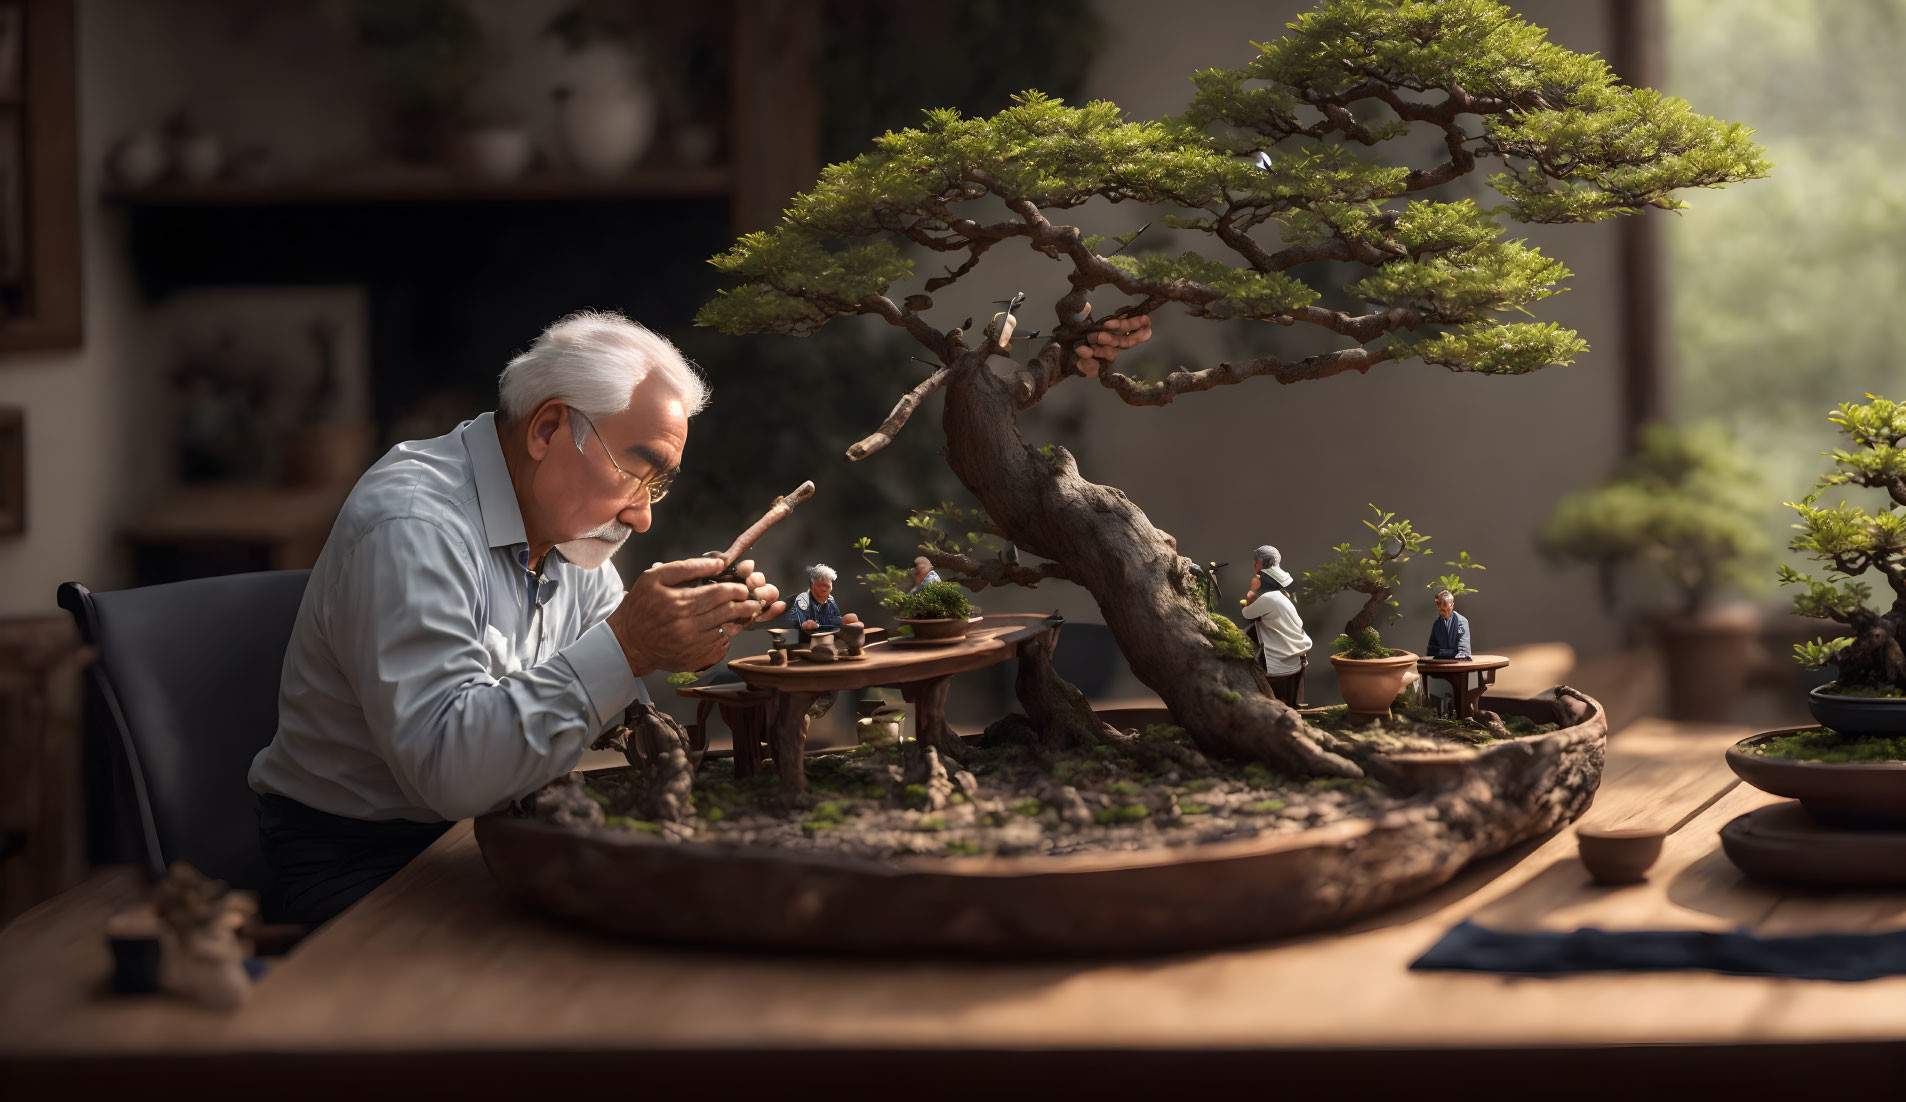 Working on a bonsai that tiny people